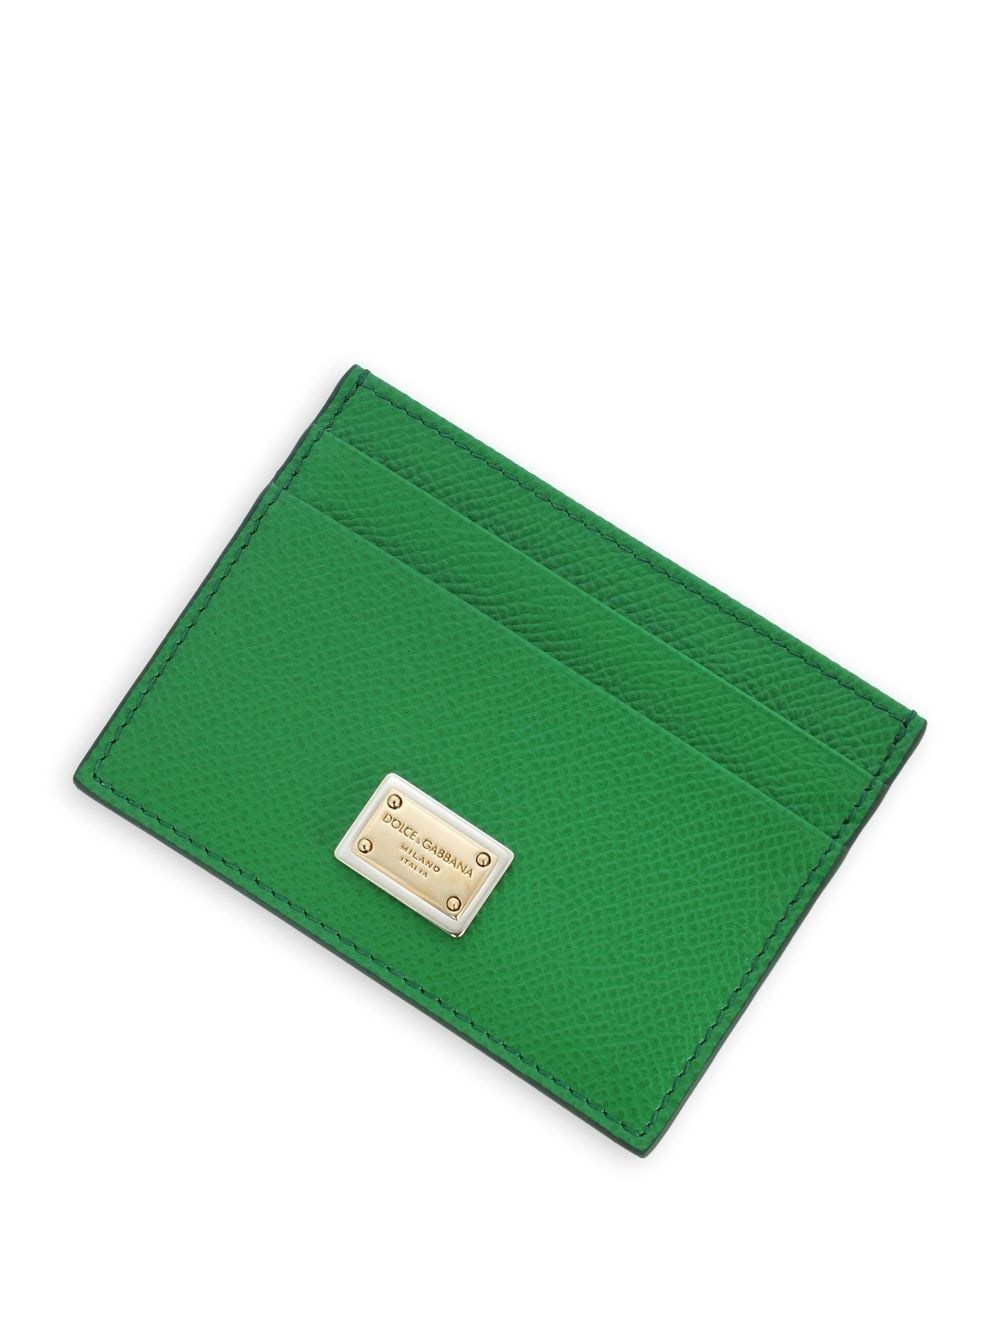 DOLCE&GABBANA PRINTED CARD HOLDER MULTCOLOR – Enzo Clothing Store